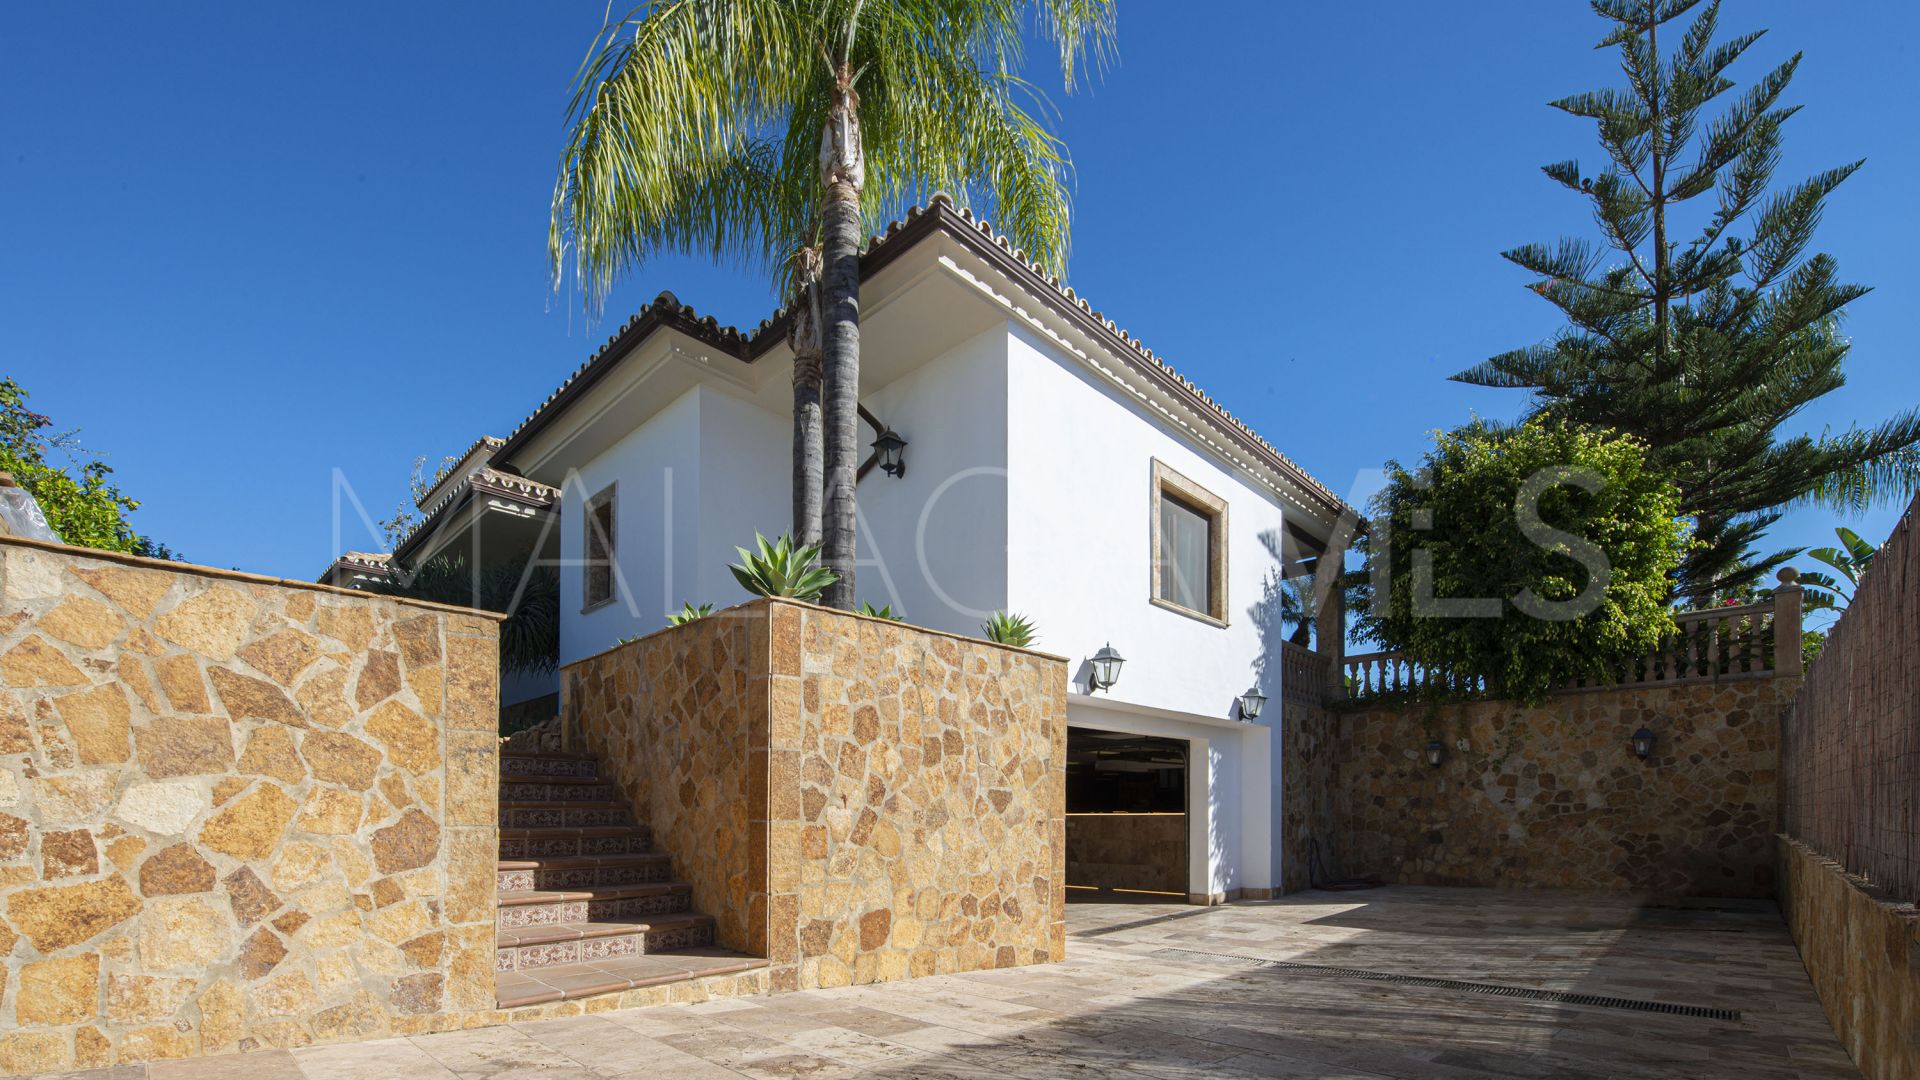 For sale villa in Mijas Golf with 5 bedrooms